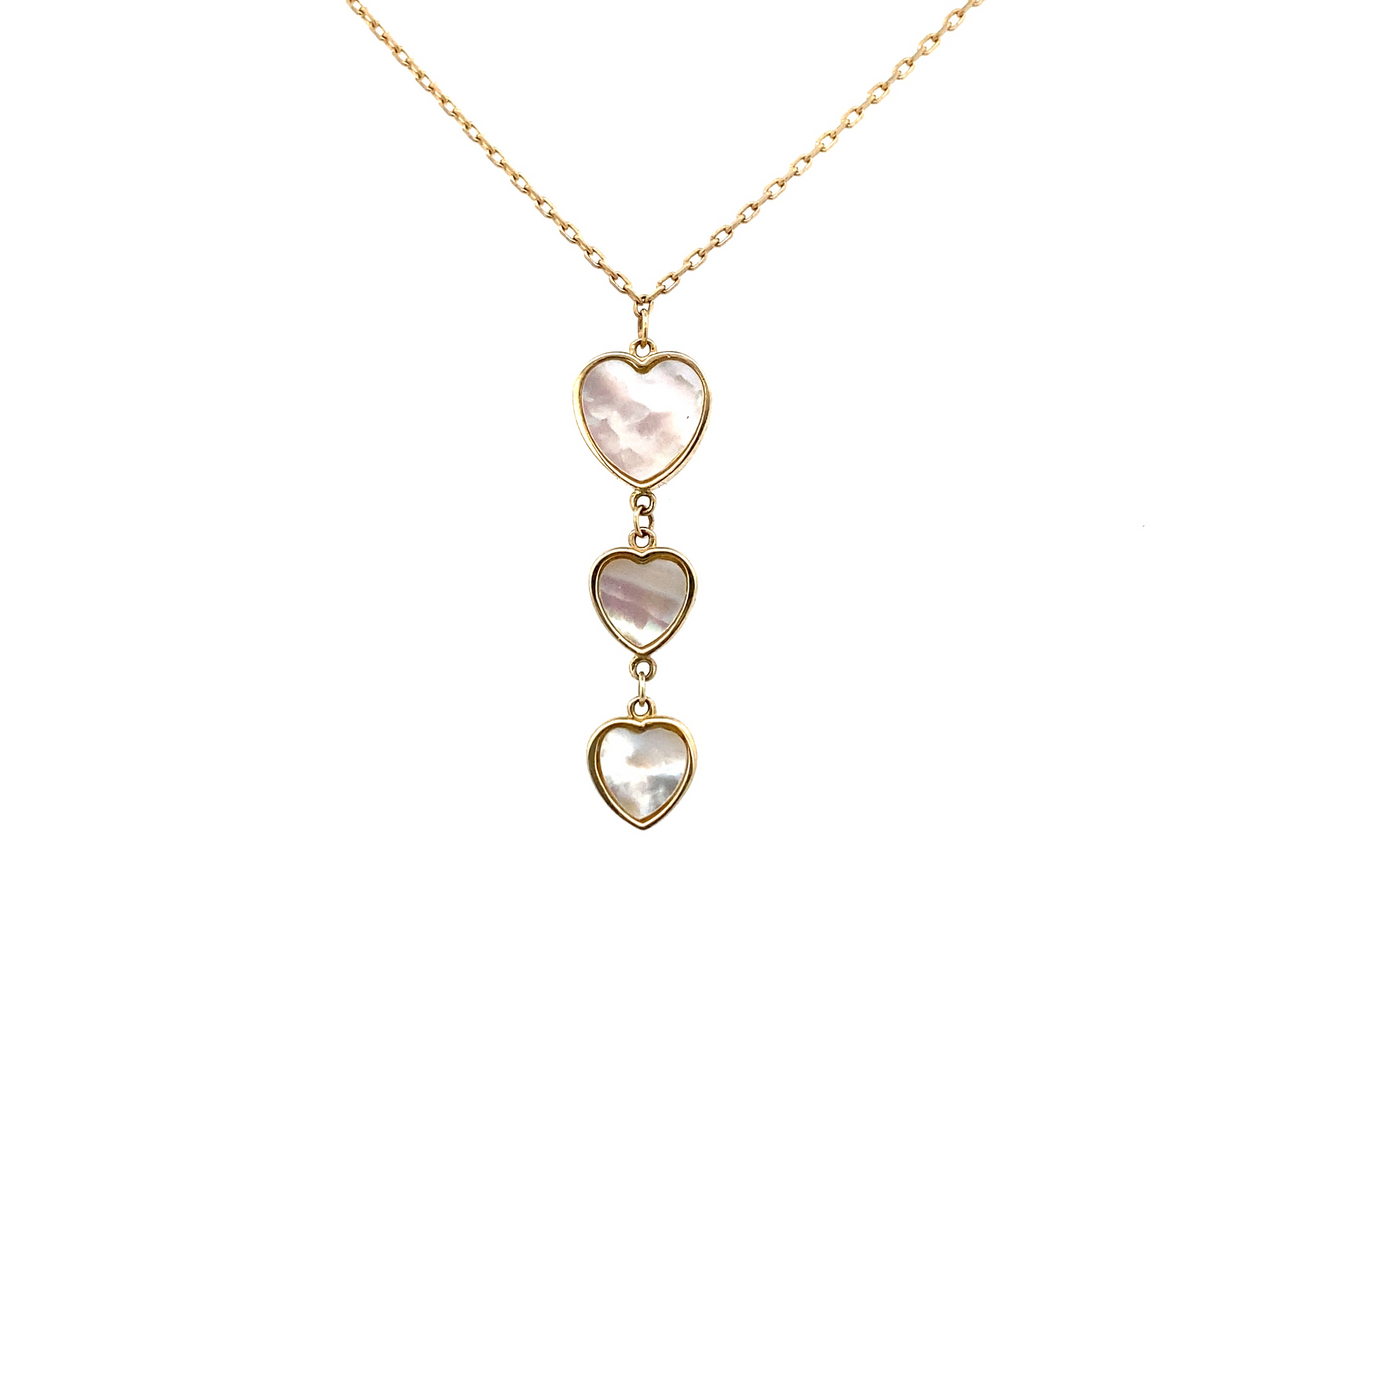 10 Karat Yellow Gold Mother of Pearl Triple Heart Necklace